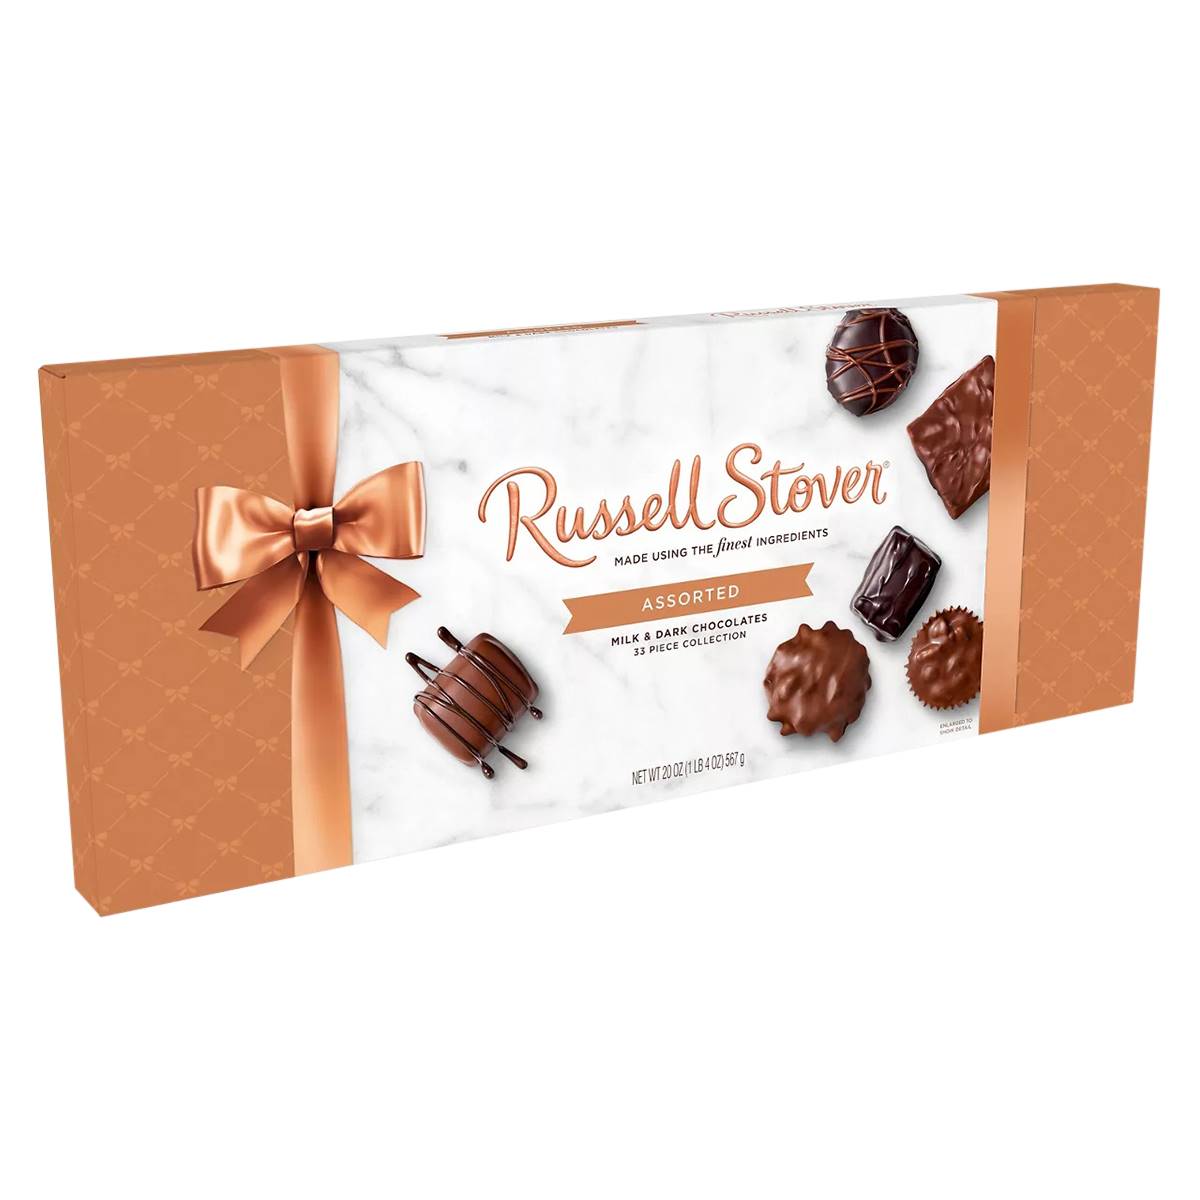 Russell Stover 20oz. Big Box Assorted Chocolates - 33 Pieces